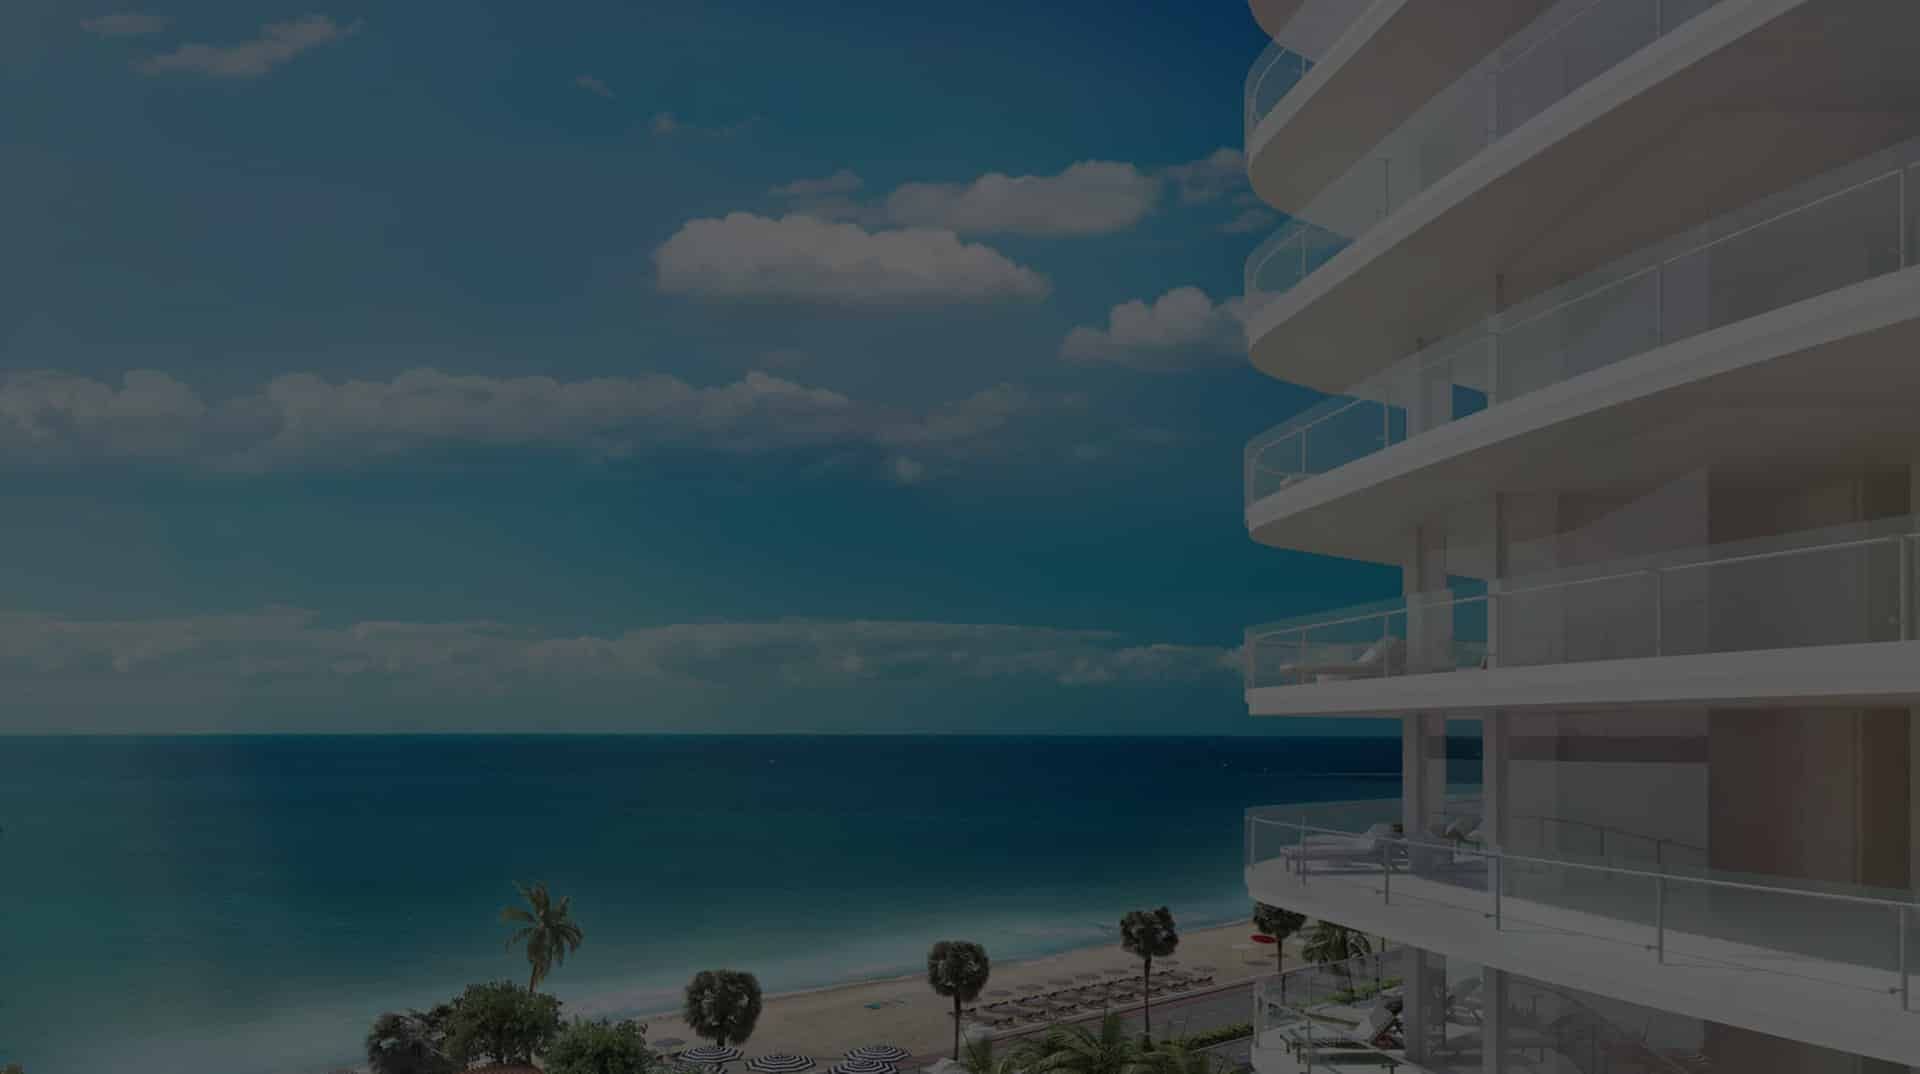 fort lauderdale condo financing, fort lauderdale condo mortgage rates, fort lauderdale condo mortgage company, fort lauderdale condo mortgage broker, fort lauderdale condo mortgage lender, fort lauderdale condotel financing, fort lauderdale mortgage condotel financing, fort lauderdale condotel mortgage rates, 